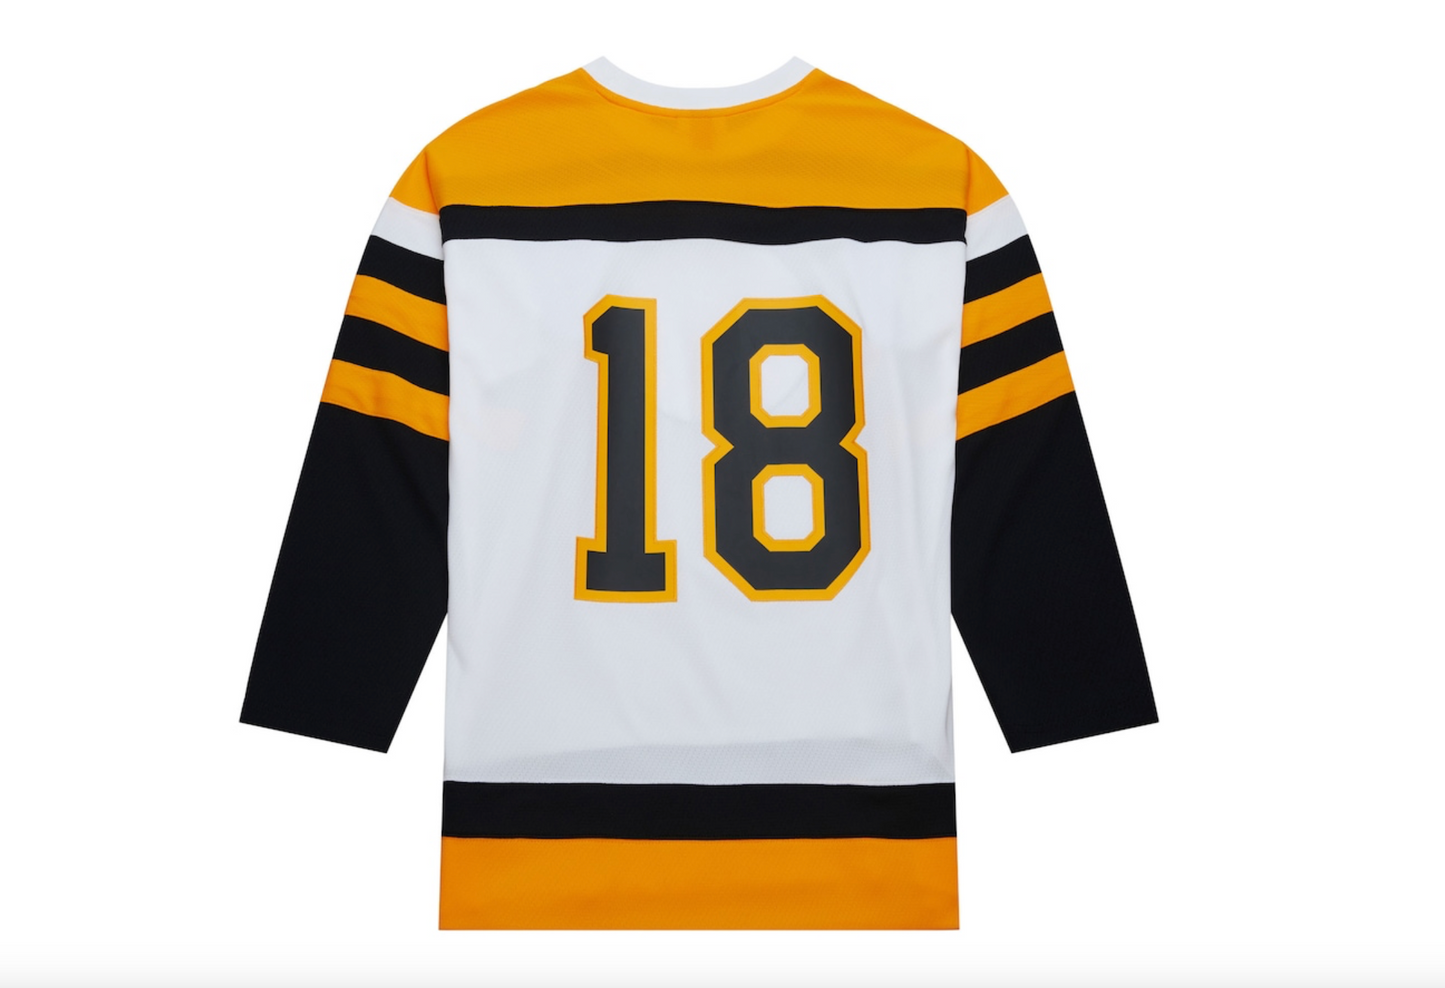 NHL White Jersey Bruins 1958 Willie O'Ree